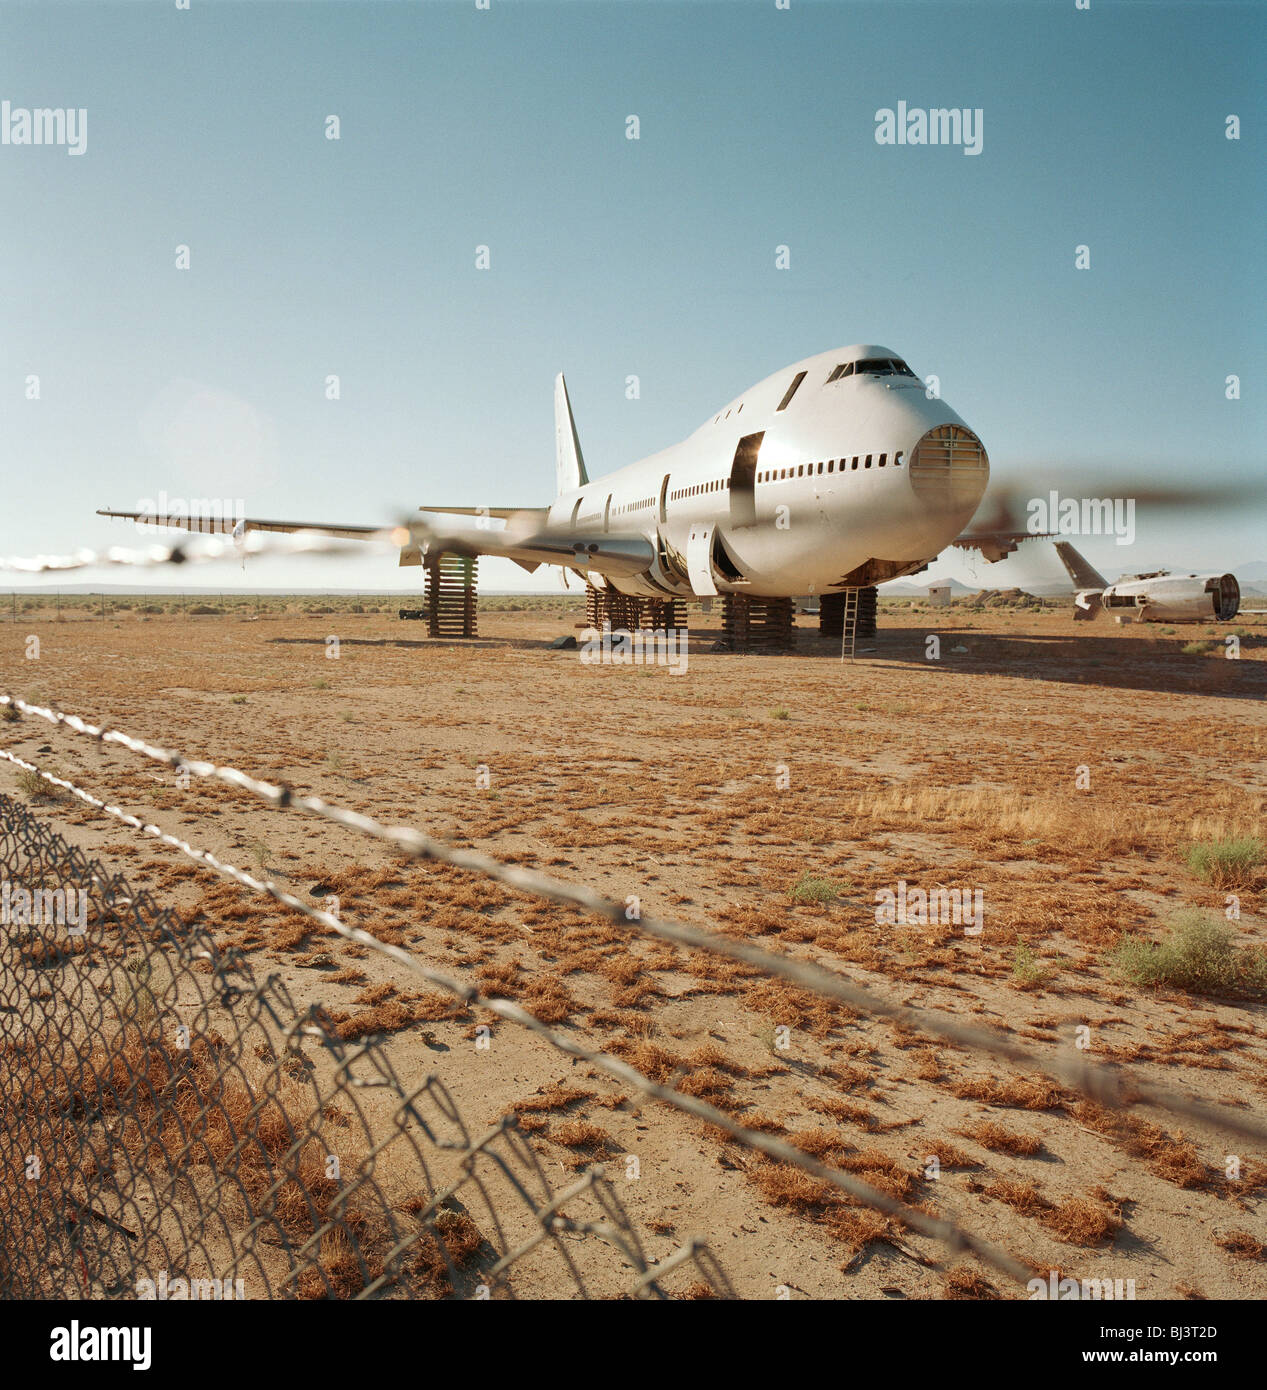 In mid-day heat of the arid Sonoran desert sits the remains of a Boeing 747 airliner at the storage facility at Mojave Stock Photo